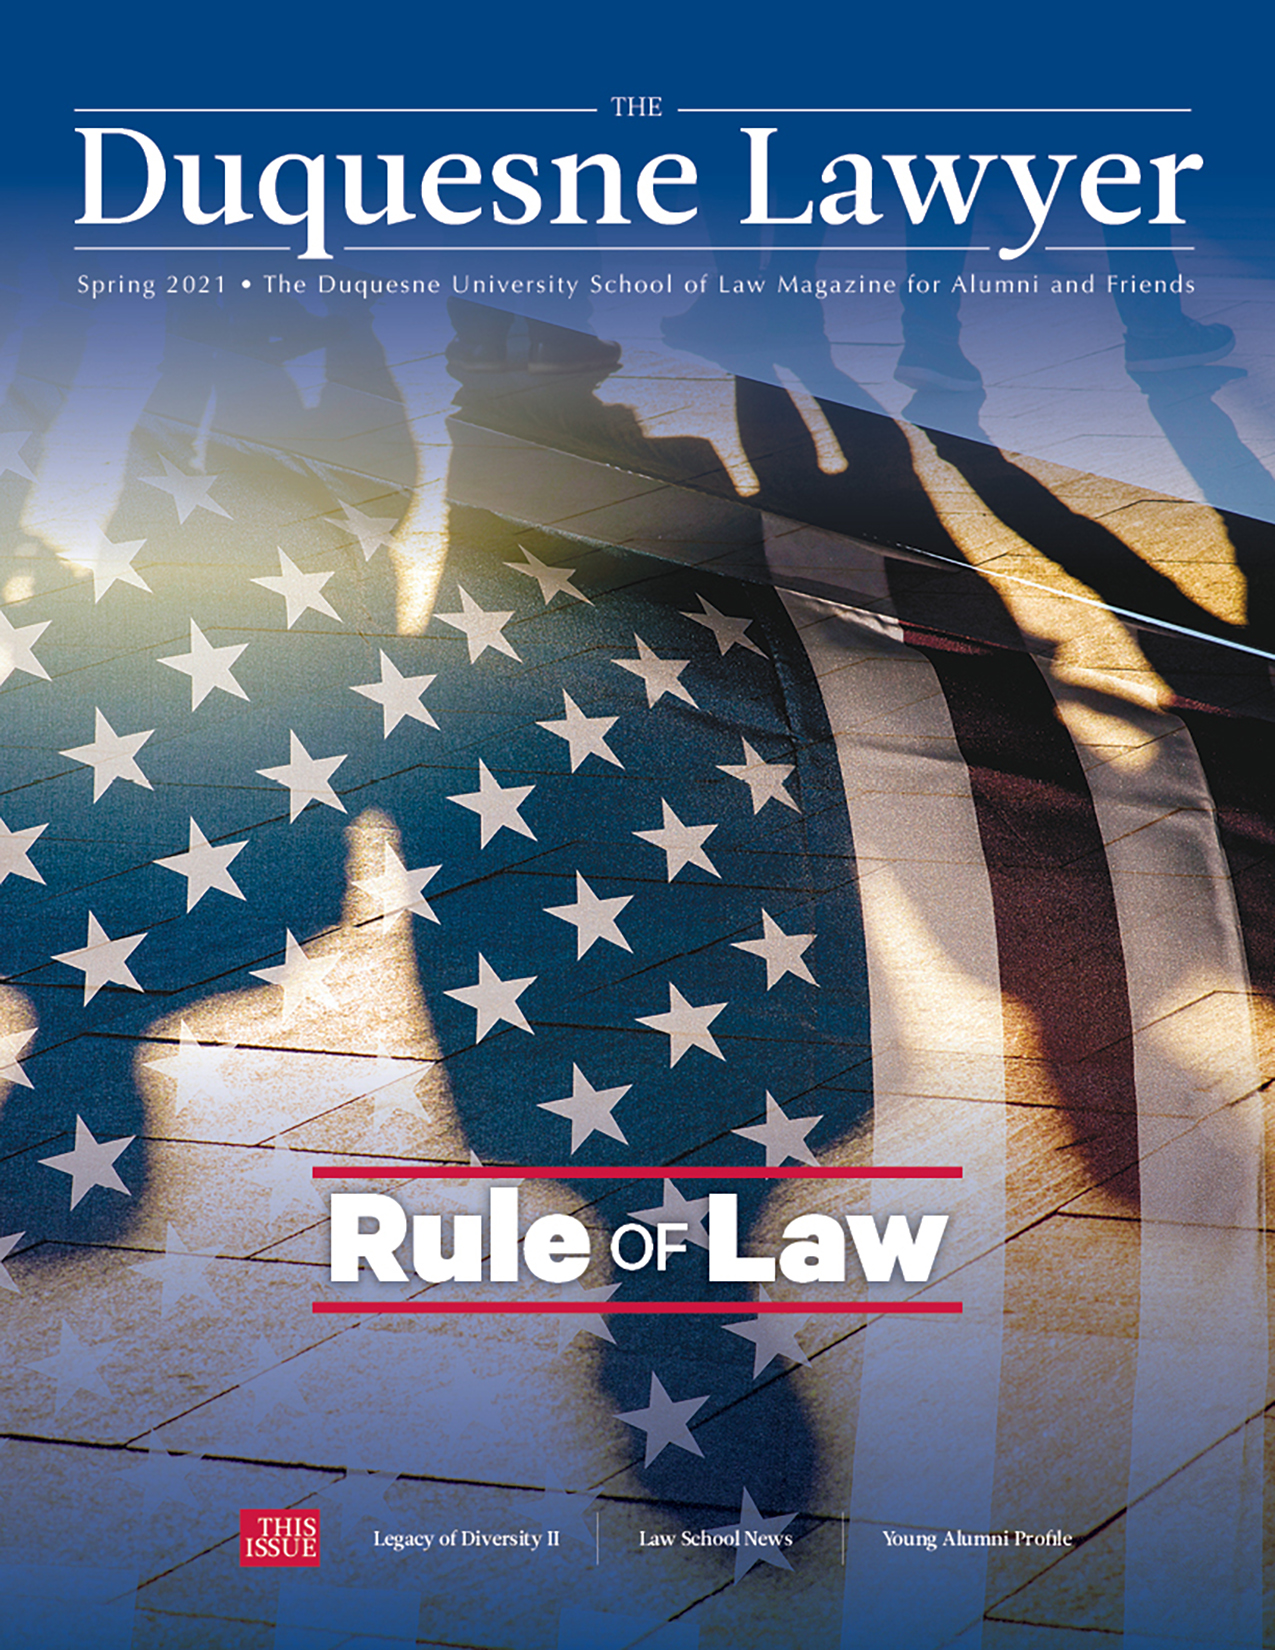 Duquesne Lawyer Magazine Spring 2021 issue